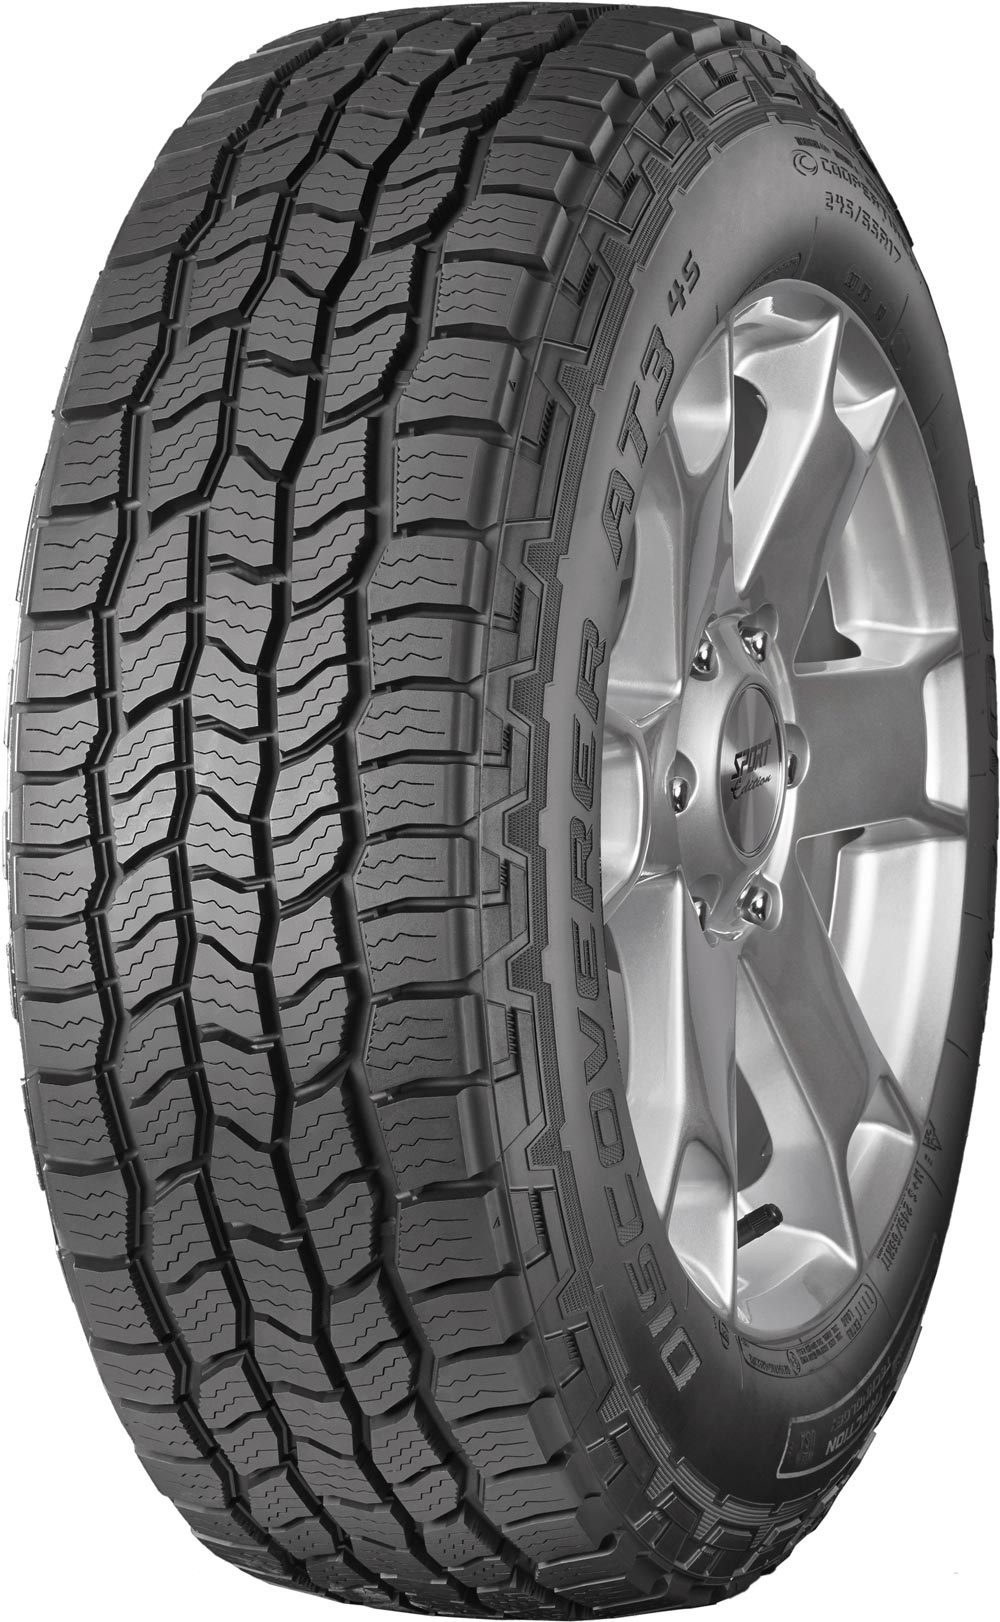 Джипови гуми COOPER DISCOVERER AT3 4S 265/75 R15 112T